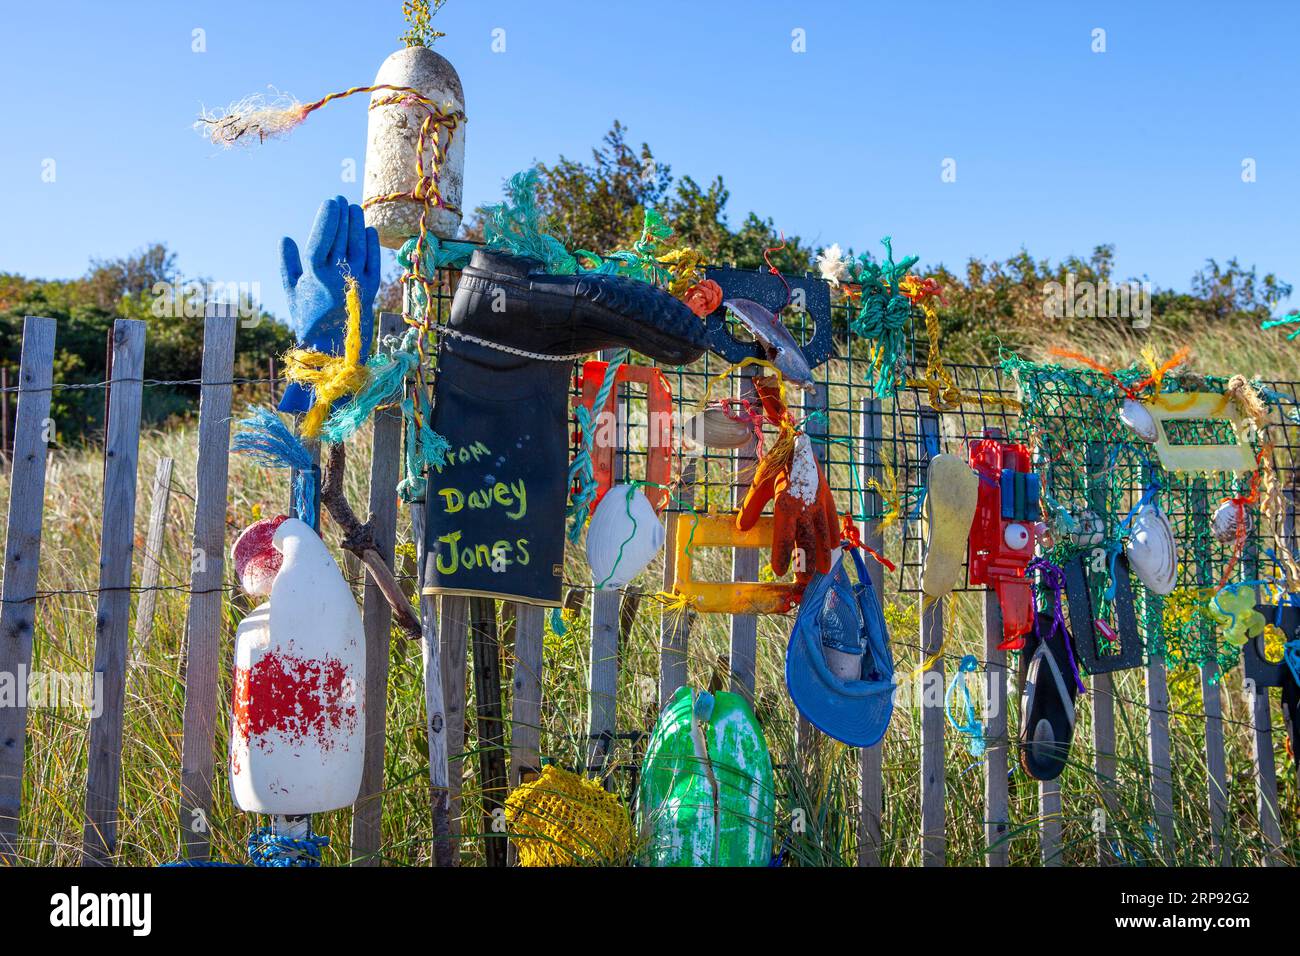 An artistic arrangement of objects on a seaside fence in Newburyport Stock Photo